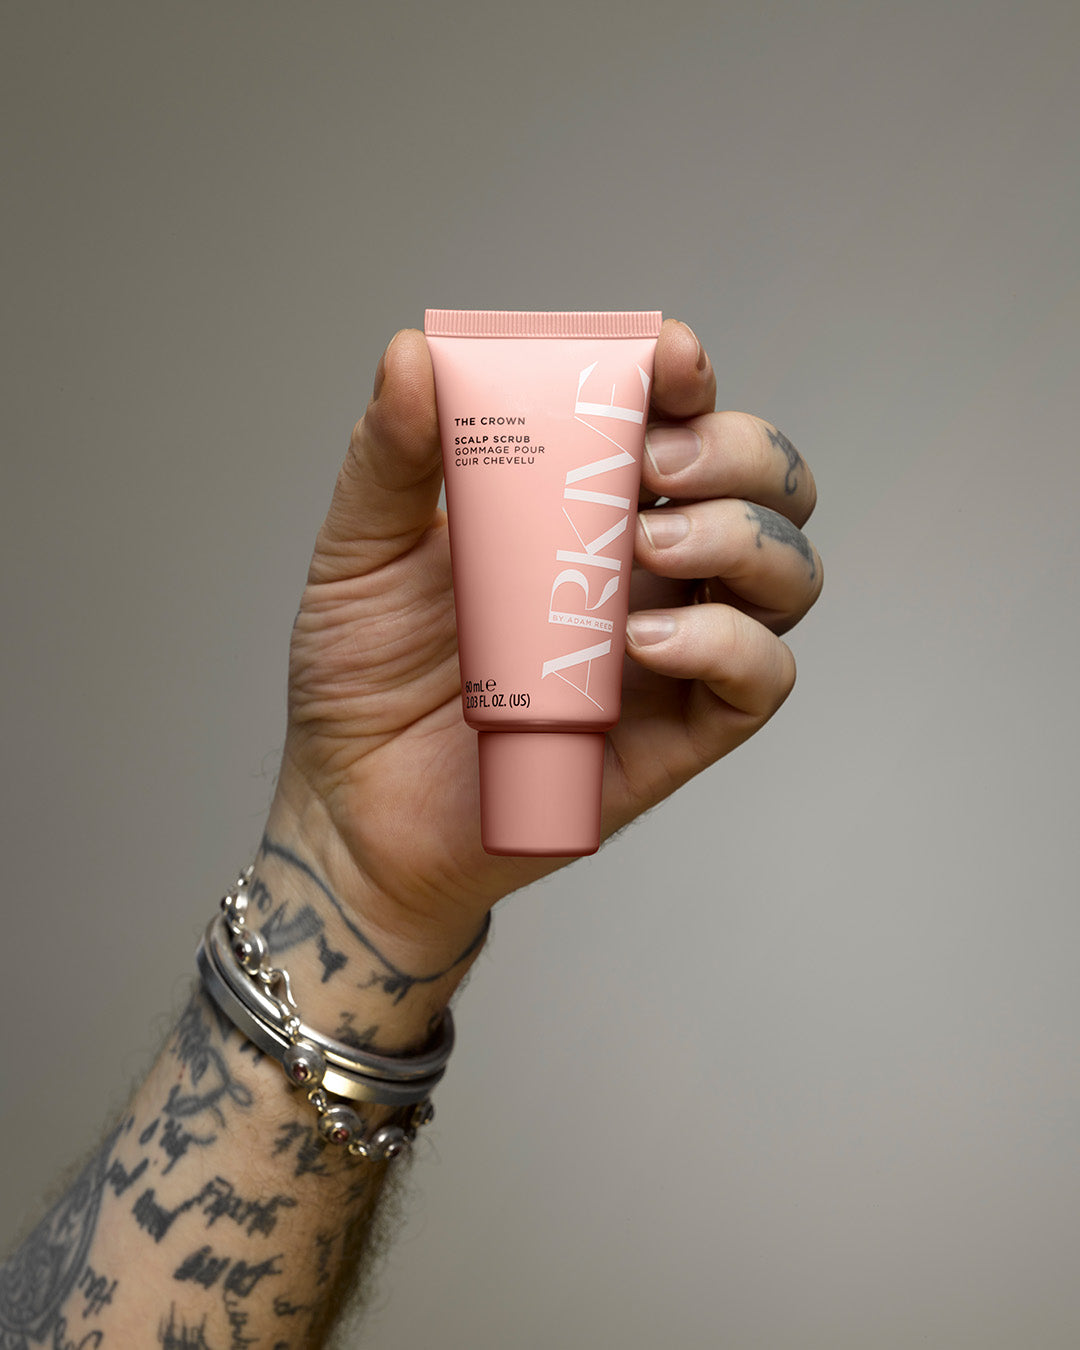 A mini bottle of Arkive's the crown scalp scrub being held in the hand